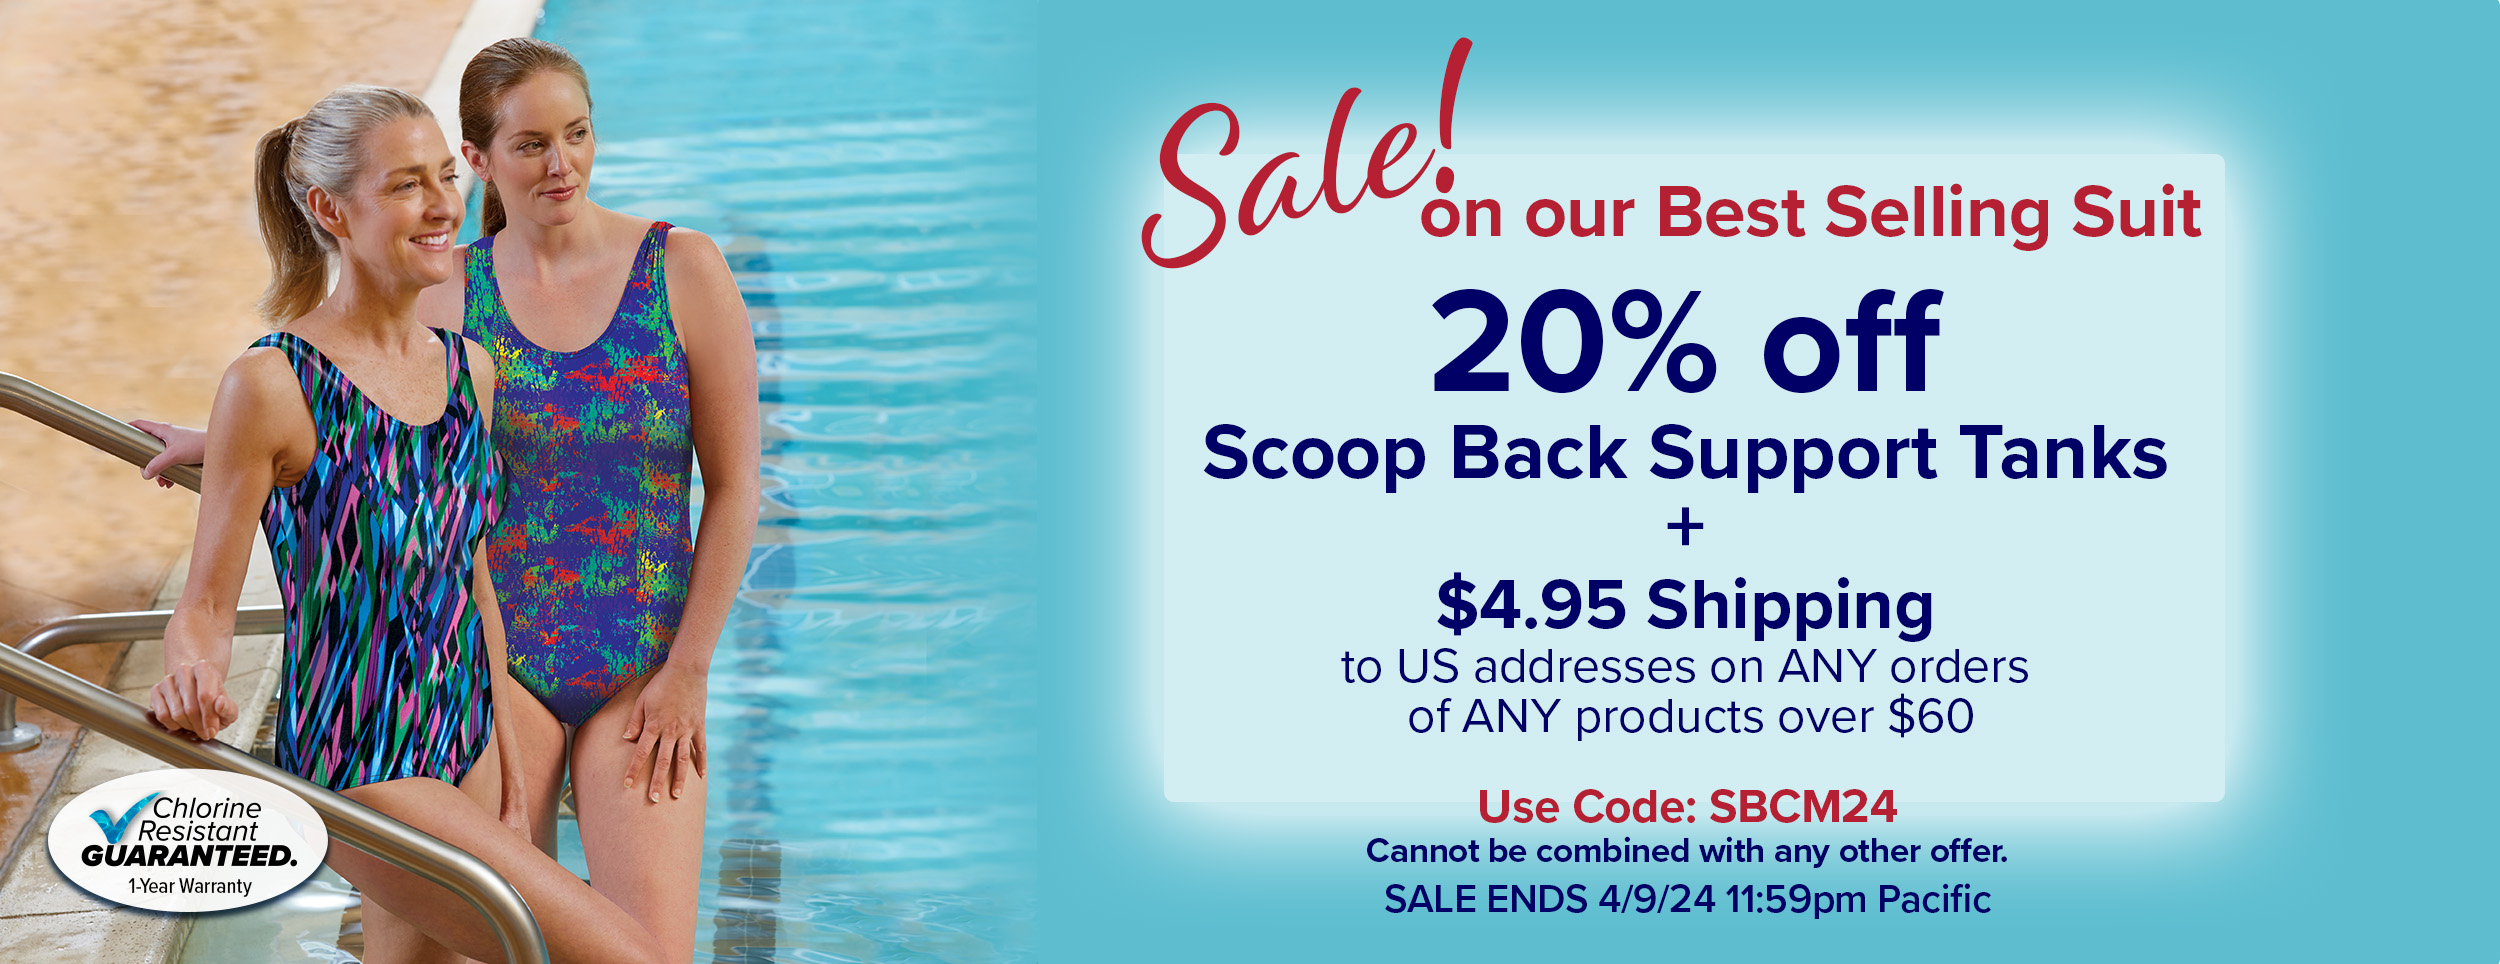 20 Percent off all scoop back support tanks using code SBCM24